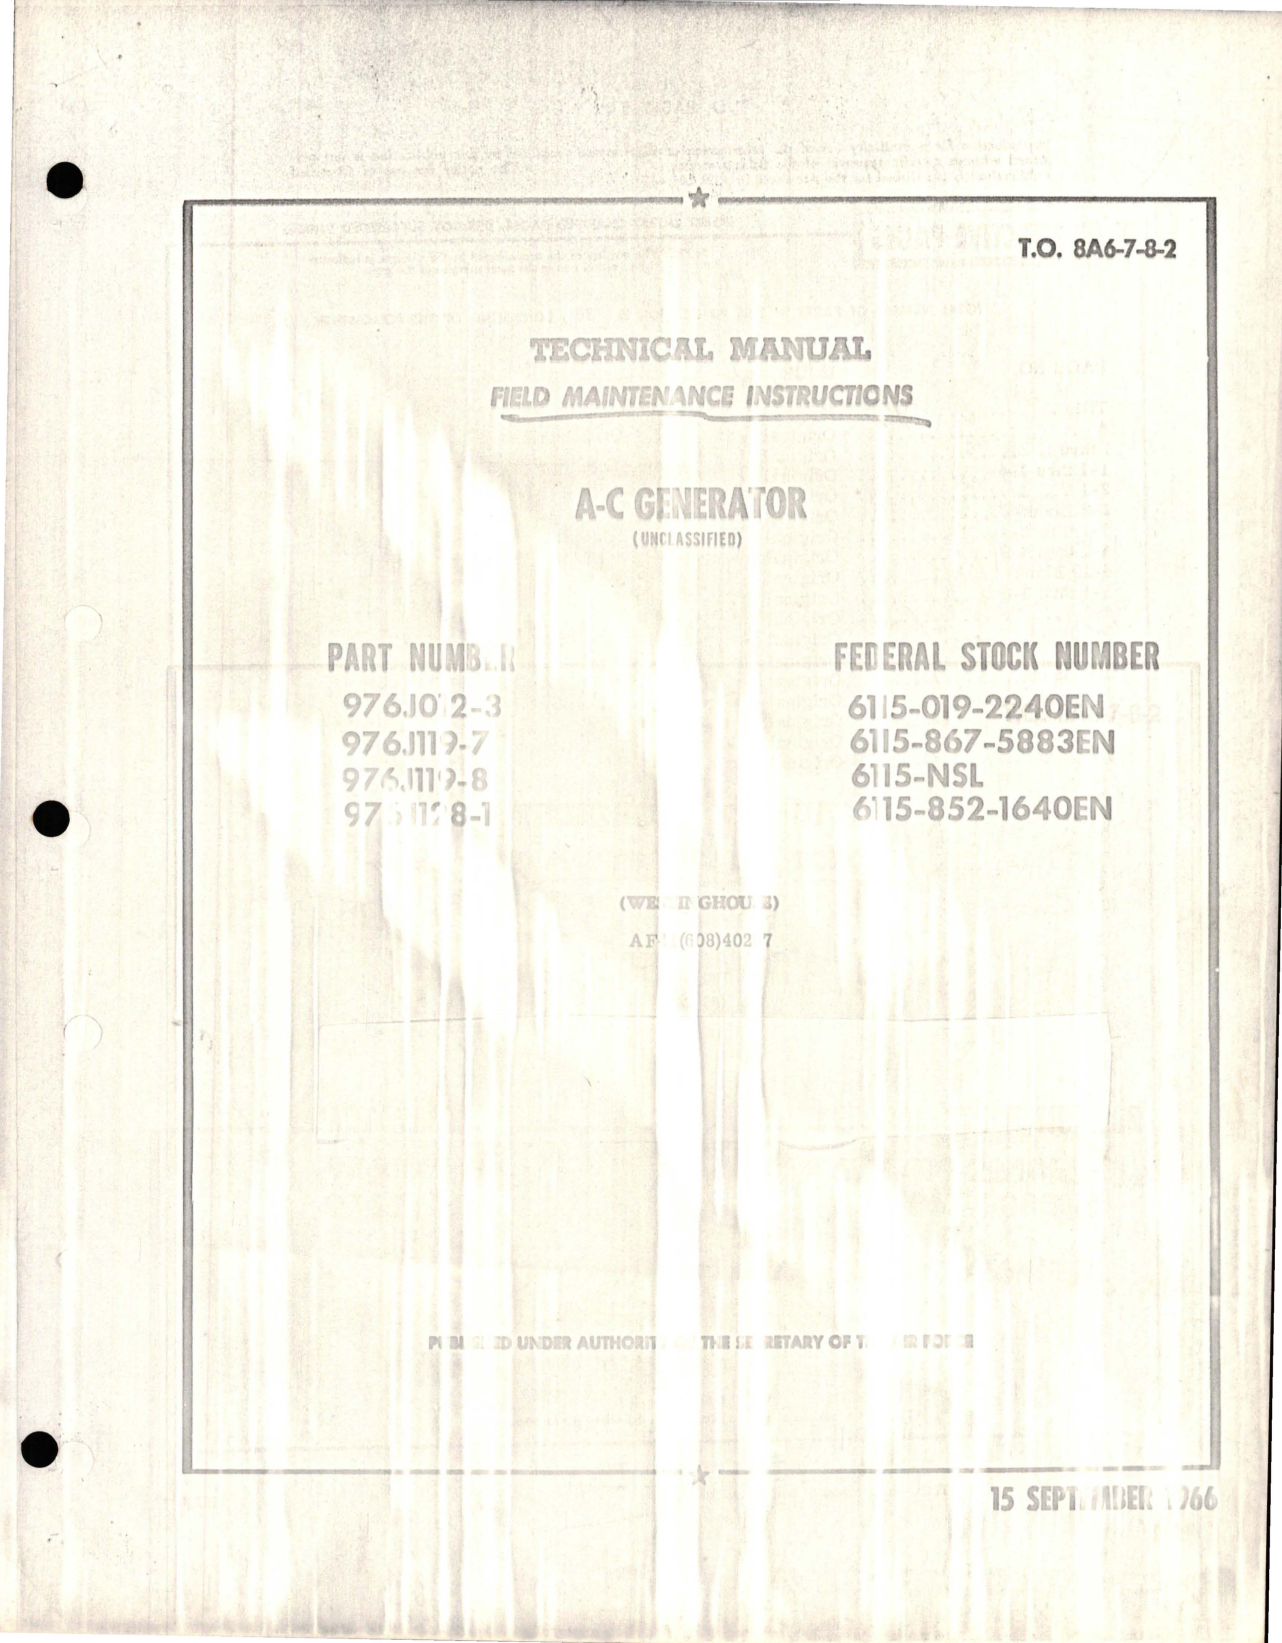 Sample page 1 from AirCorps Library document: Field Maintenance Instructions for A-C Generator - Parts 976J012-3, 976J119-7, 976J119-8, and 976J128-1 